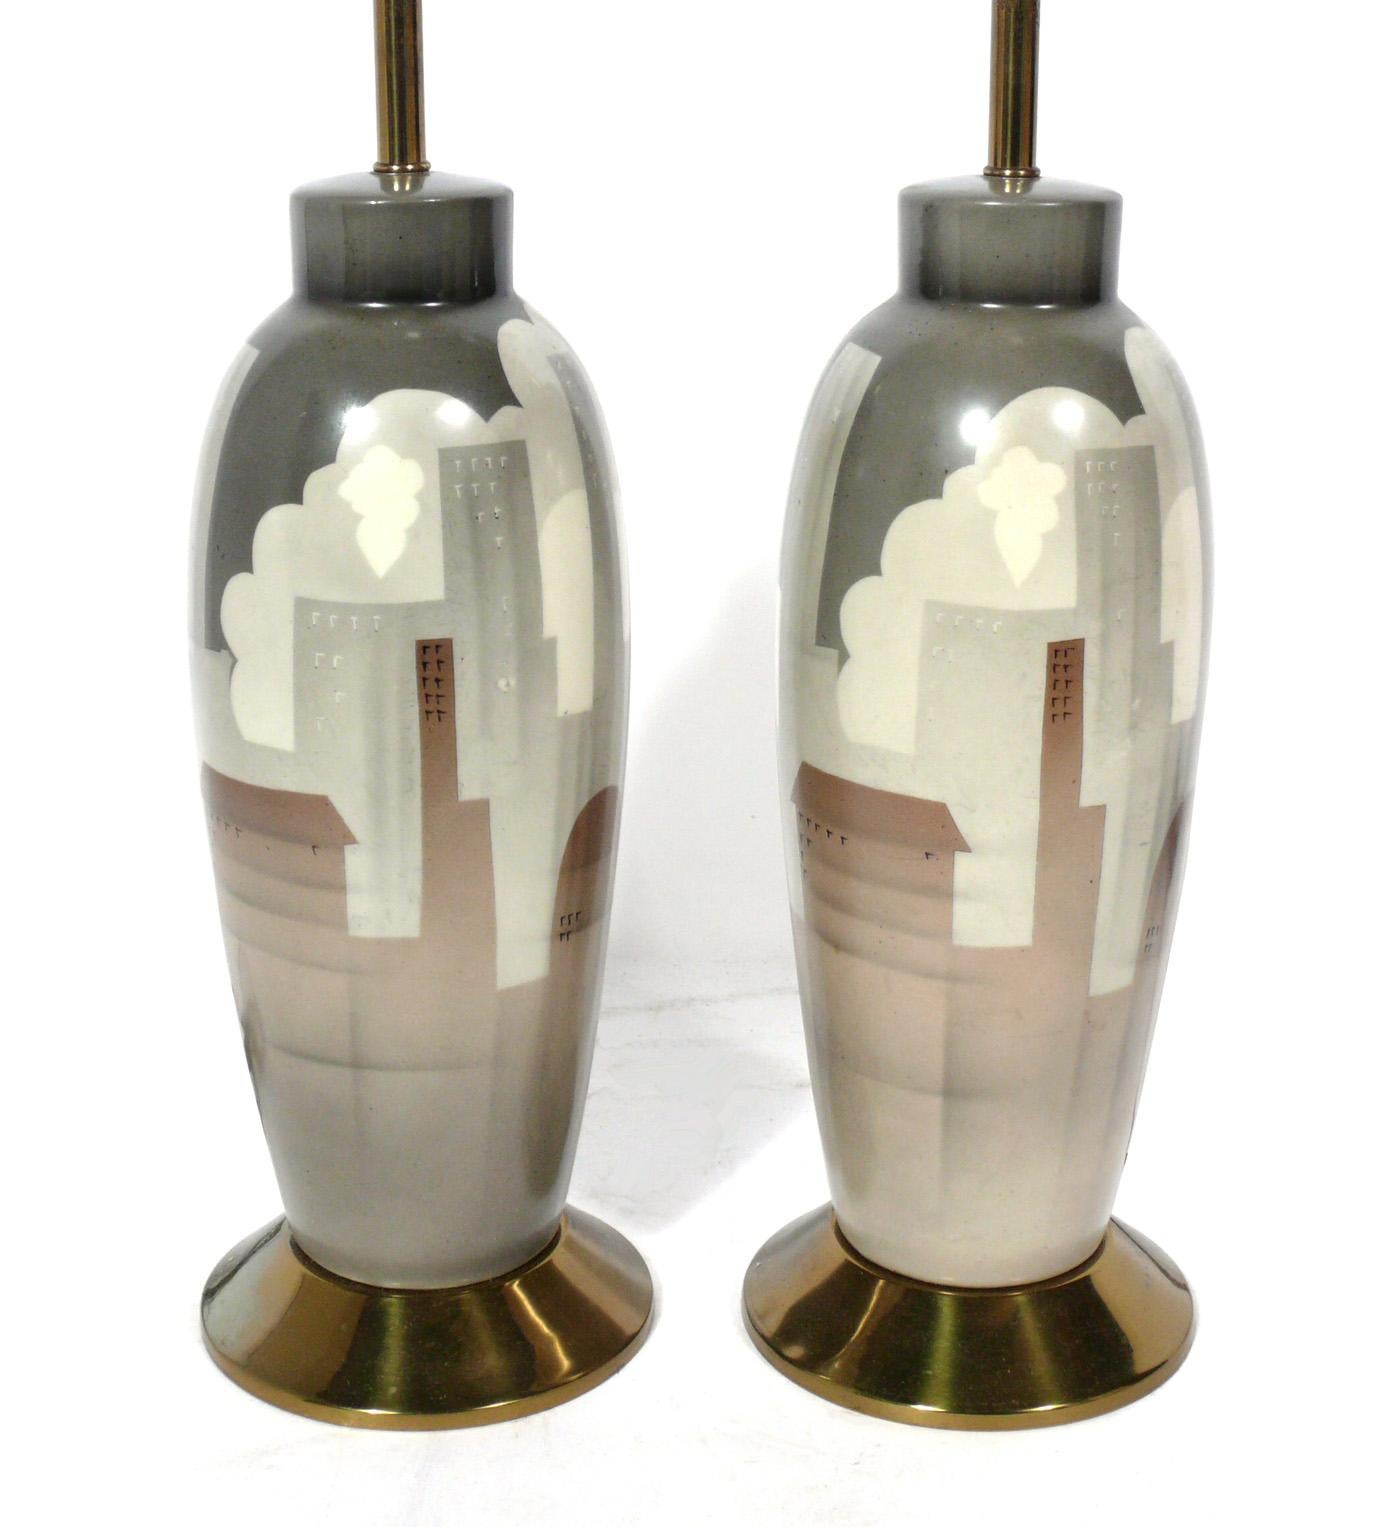 NYC cityscape pottery lamps, American, circa 1940s. They feature ceramic bodies, with brass hardware, and retain their original fabric shades and finials. They have been rewired and are ready to use.